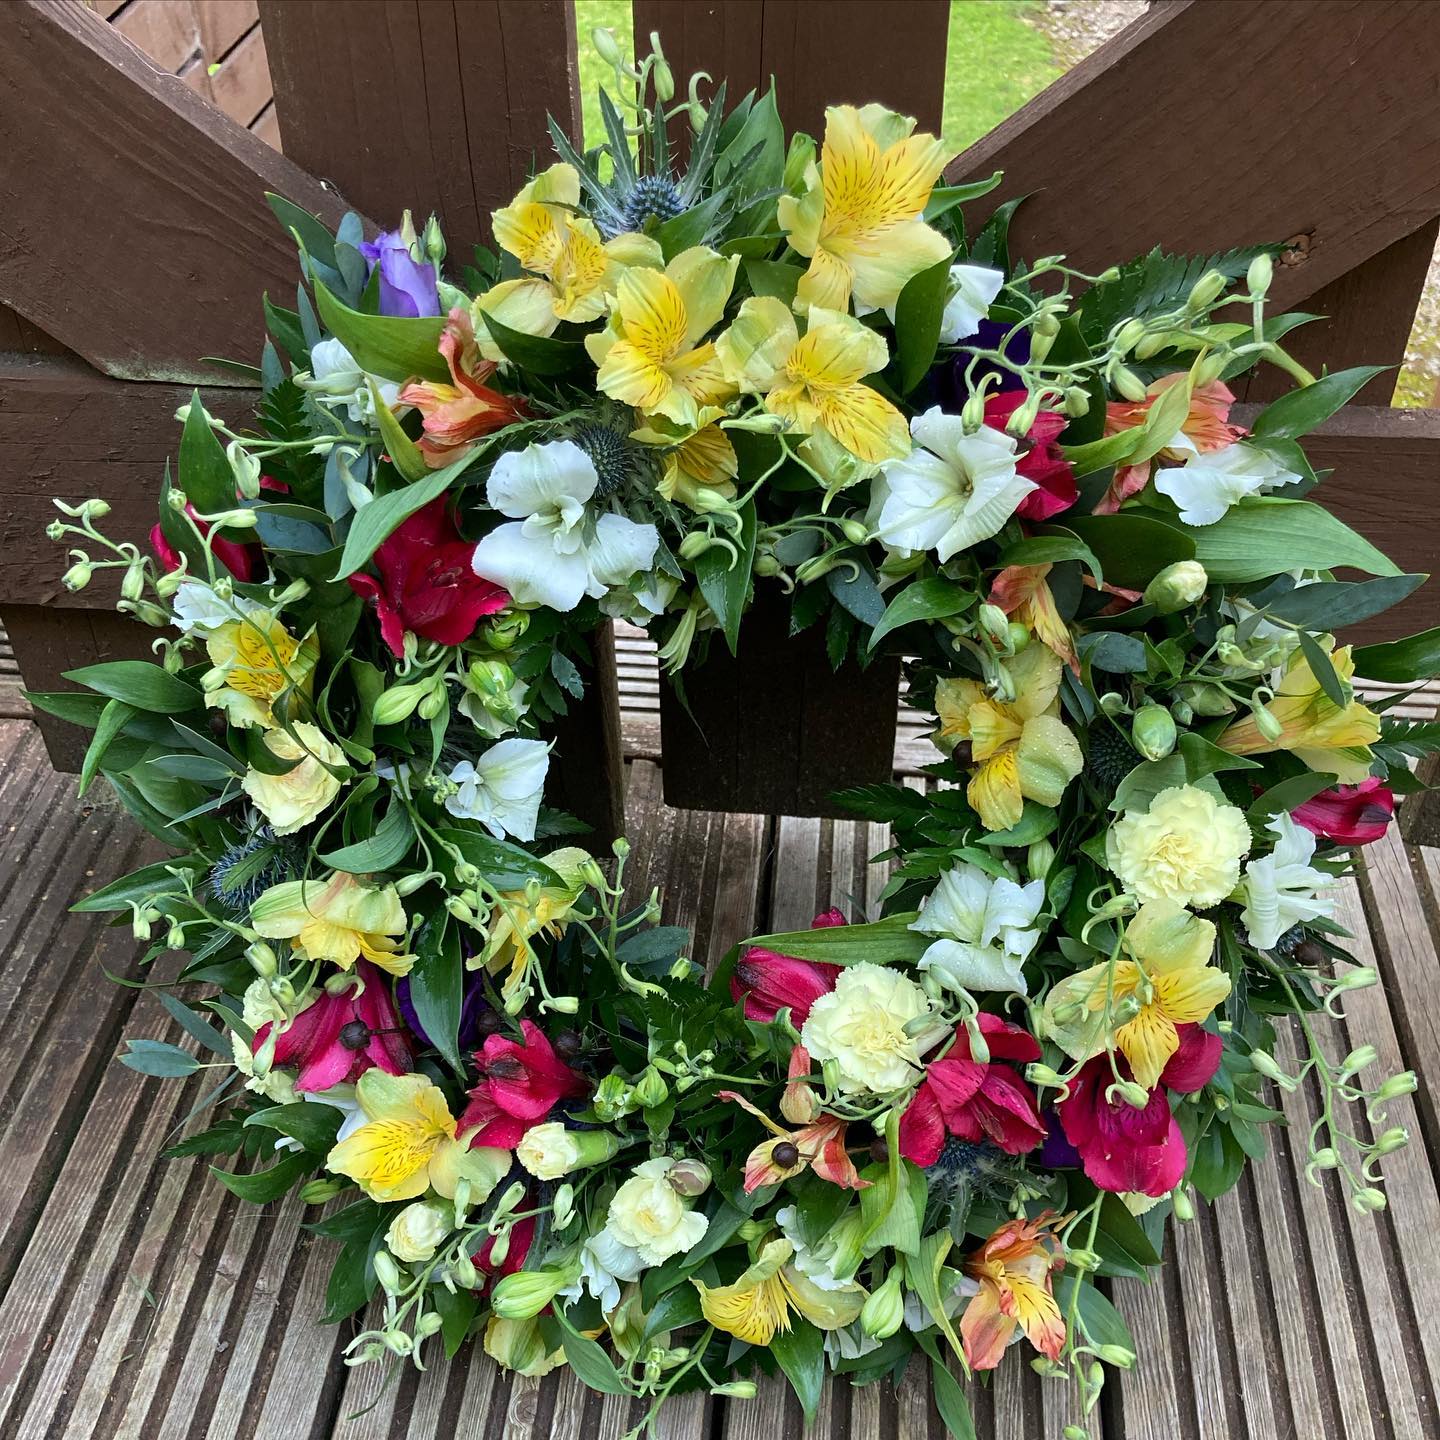 Funeral Wreath created by  Rachel's Country flowers who is a specialist funeral florist situated in the Scottish Highlands. Covering Edderton, Tain, Seaboard Villages, Balintore, Hilton, Fearn, Portmahomack, Invergordon, Alness, Dornoch, Golspie, Ardgay, Lairg. Lettering casket sprays, sheafs, posies and wreaths